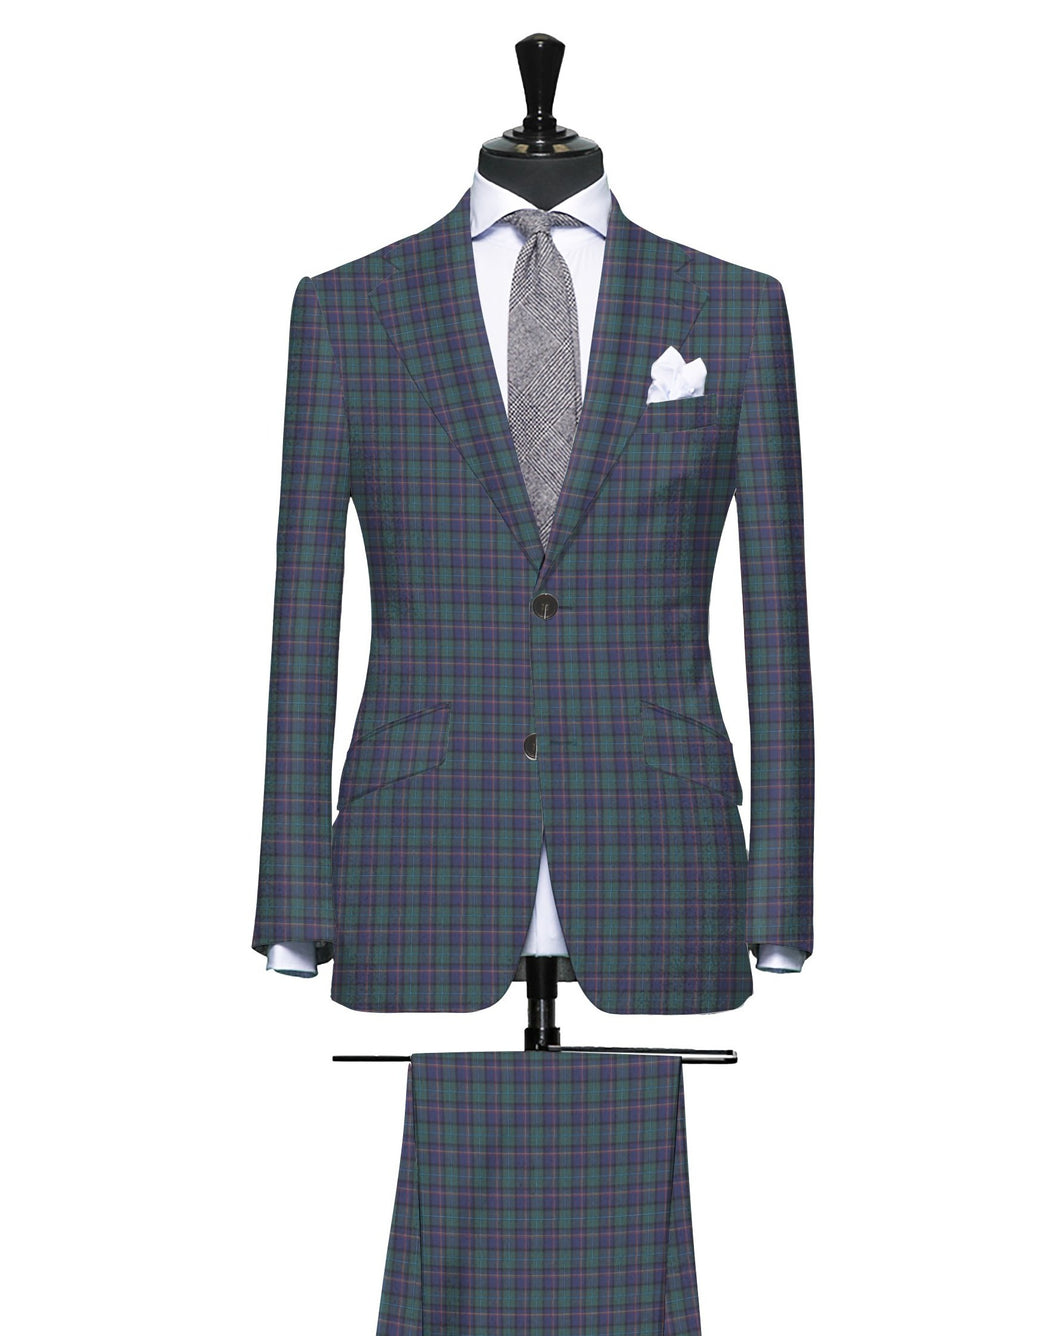 The Gentleman's Green and Blue Tartan with Red and Light Blue Accents